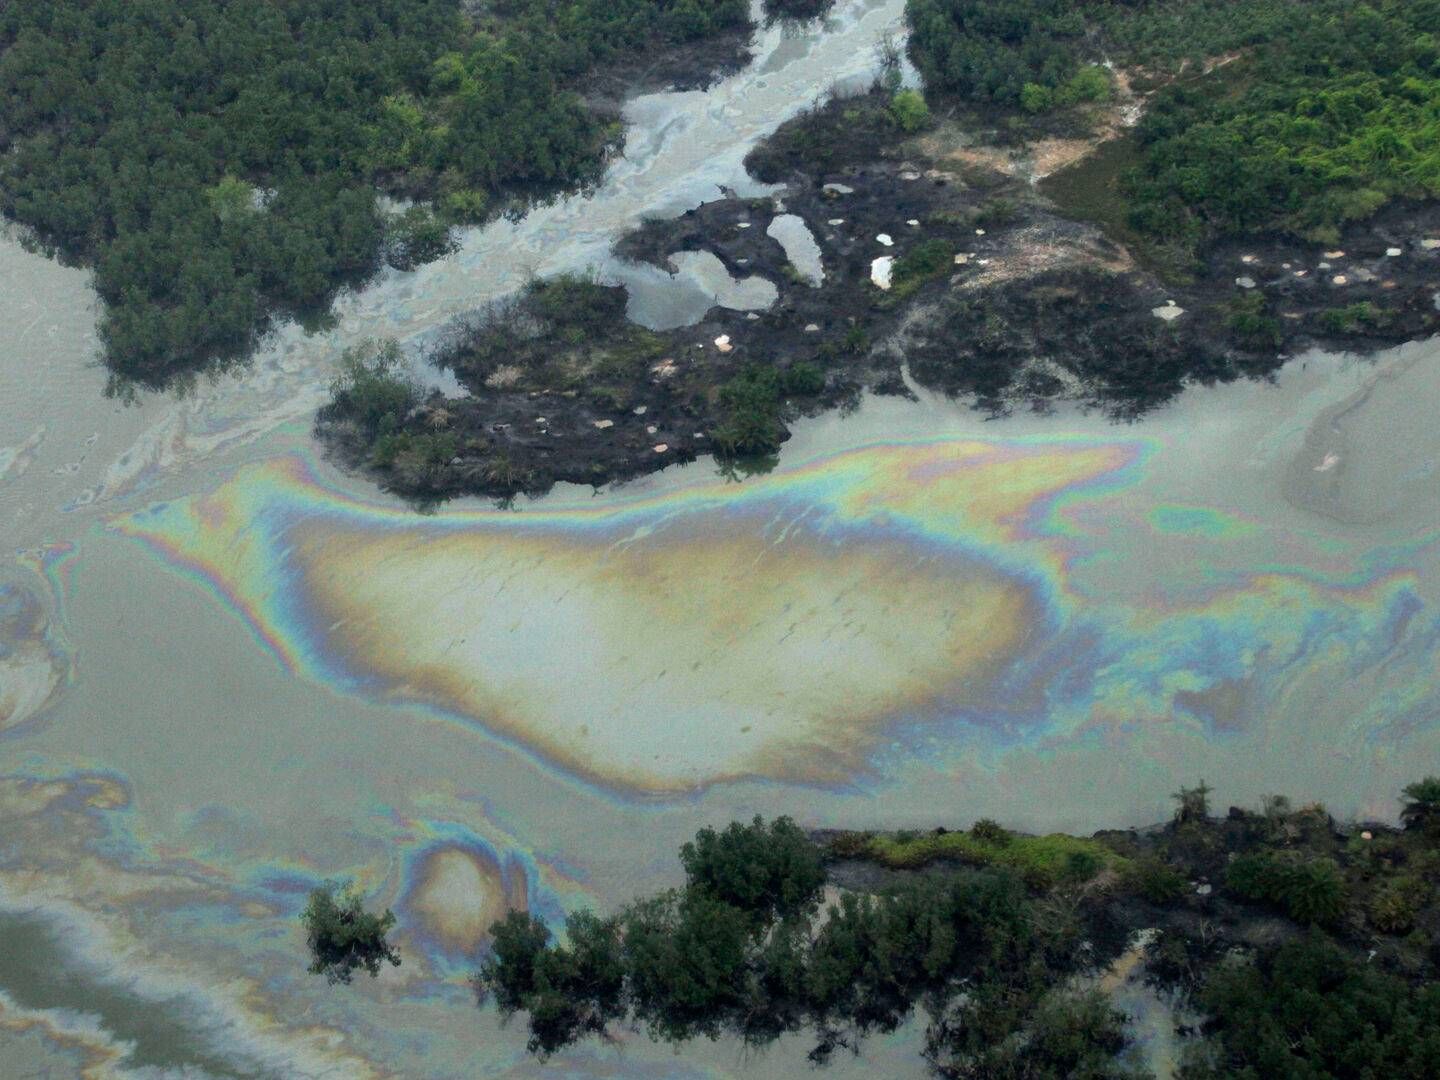 Oil pollution in the Niger delta – campaigners claim that the Norwegian oil fund's engagement efforts with Shell have been fruitless. | Photo: Sunday Alamba/AP/Ritzau Scanpix